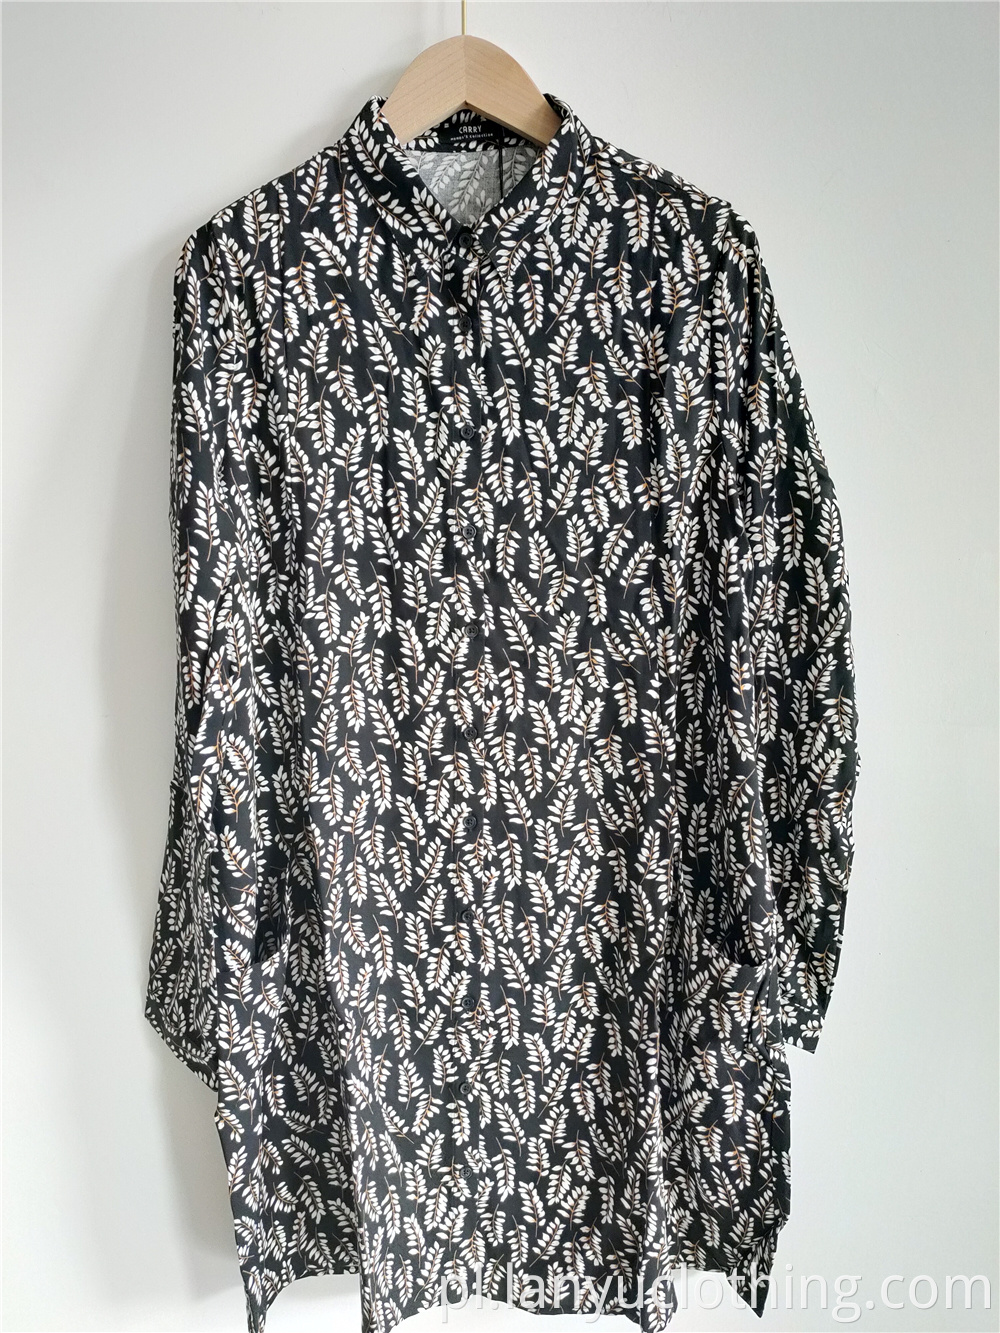 Black Printed Shirt With Standing Collar For Women